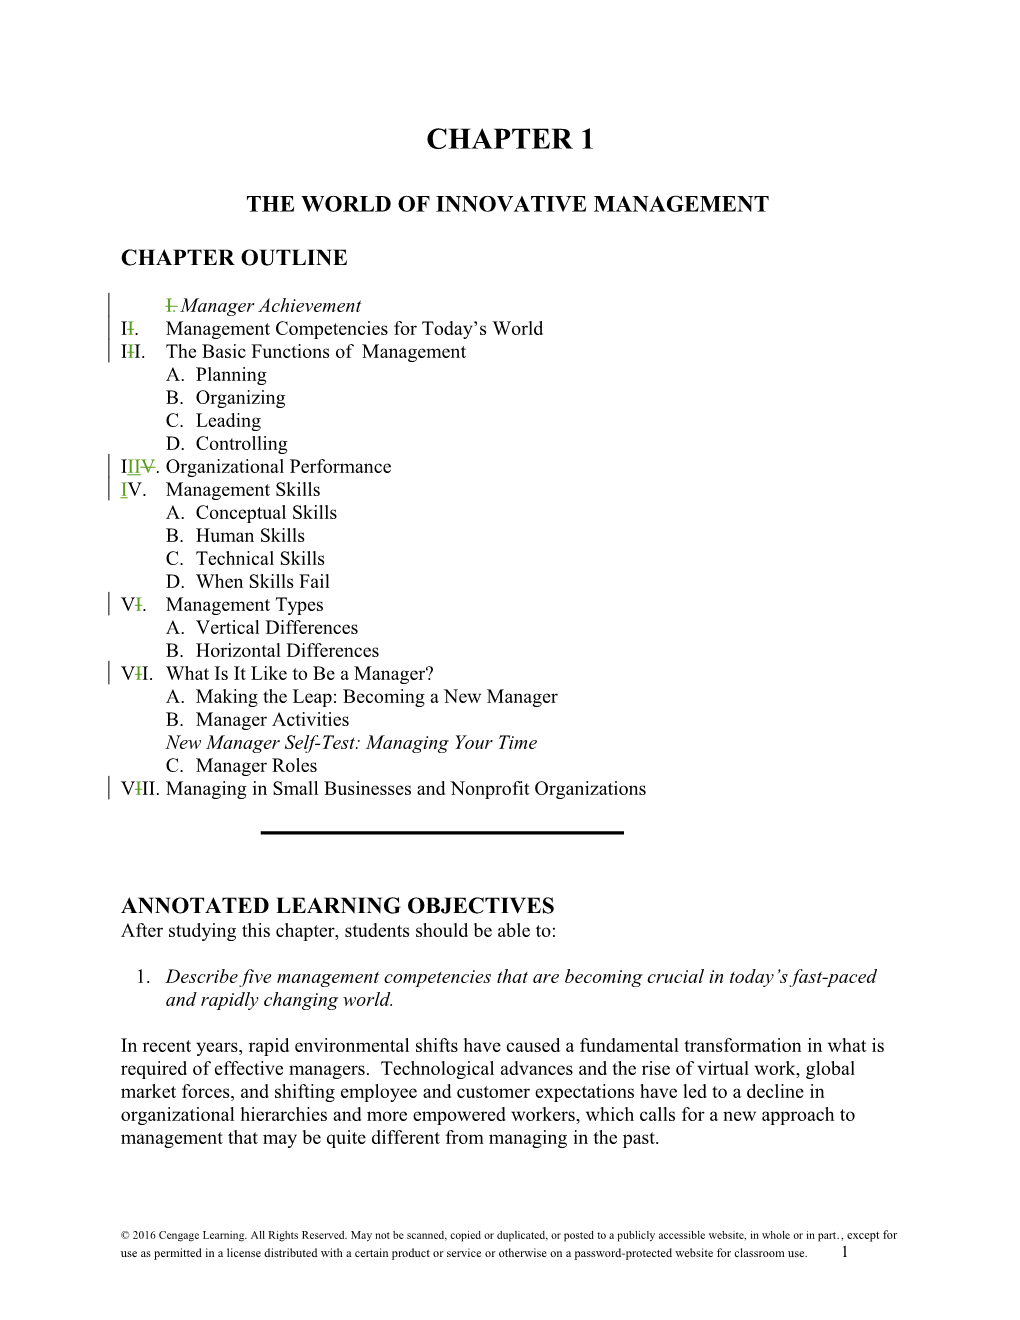 Full File at the World of Innovative Management 19